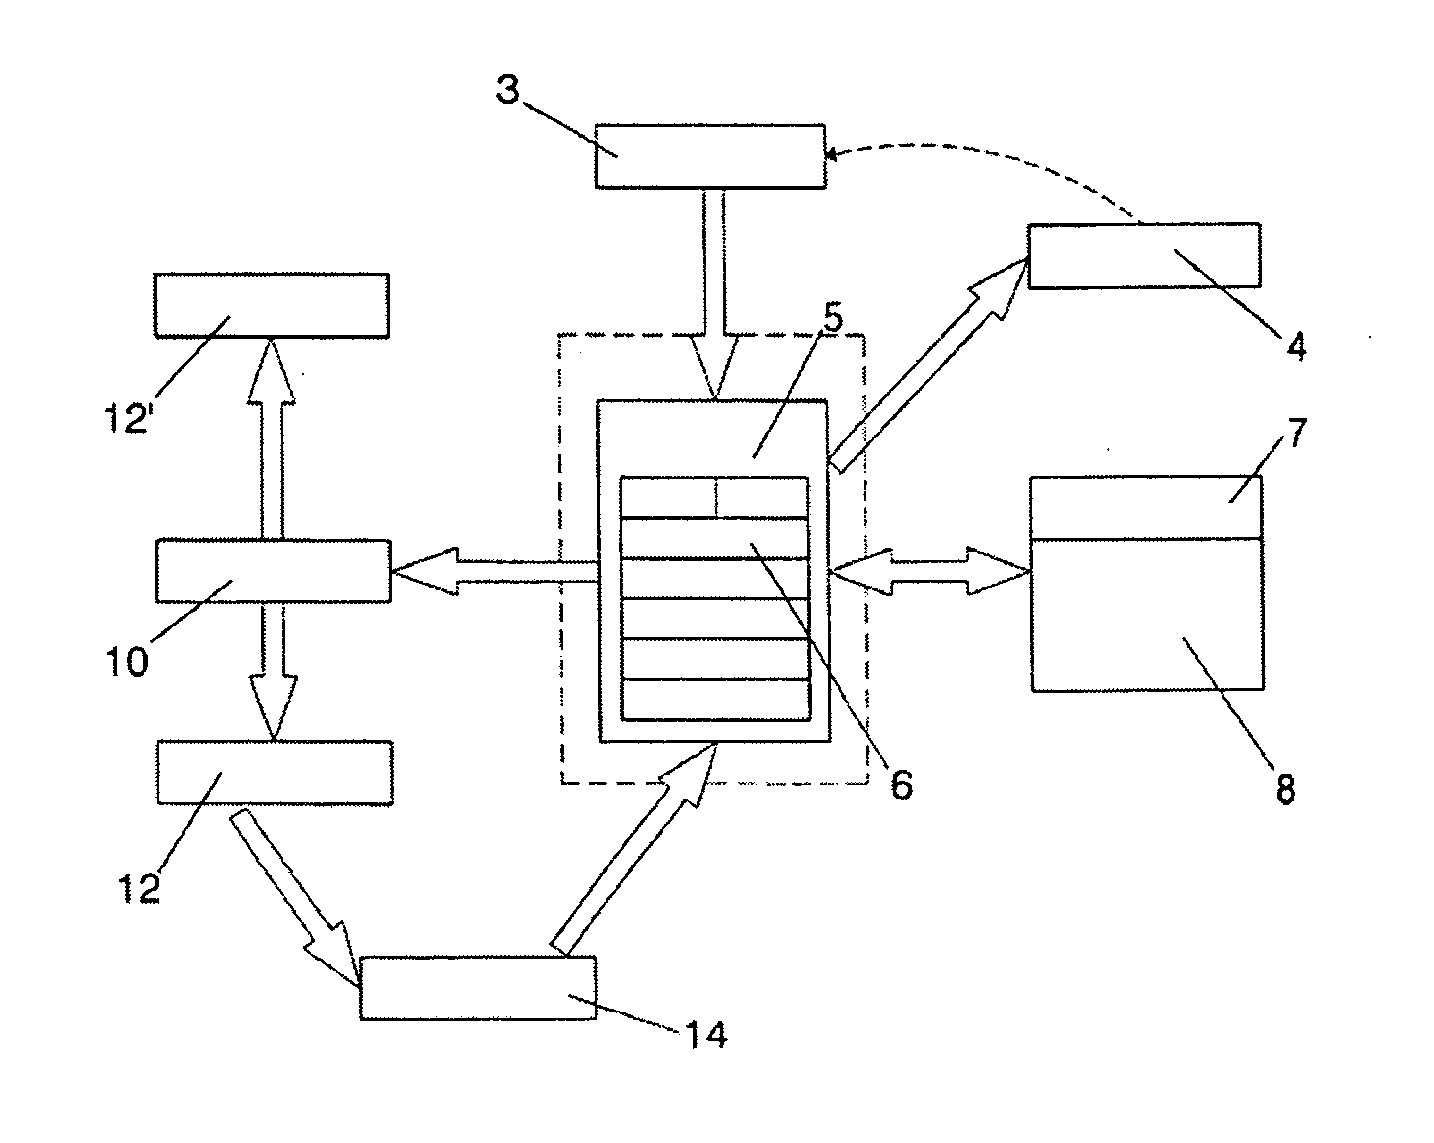 System for recognizing and validating banknotes